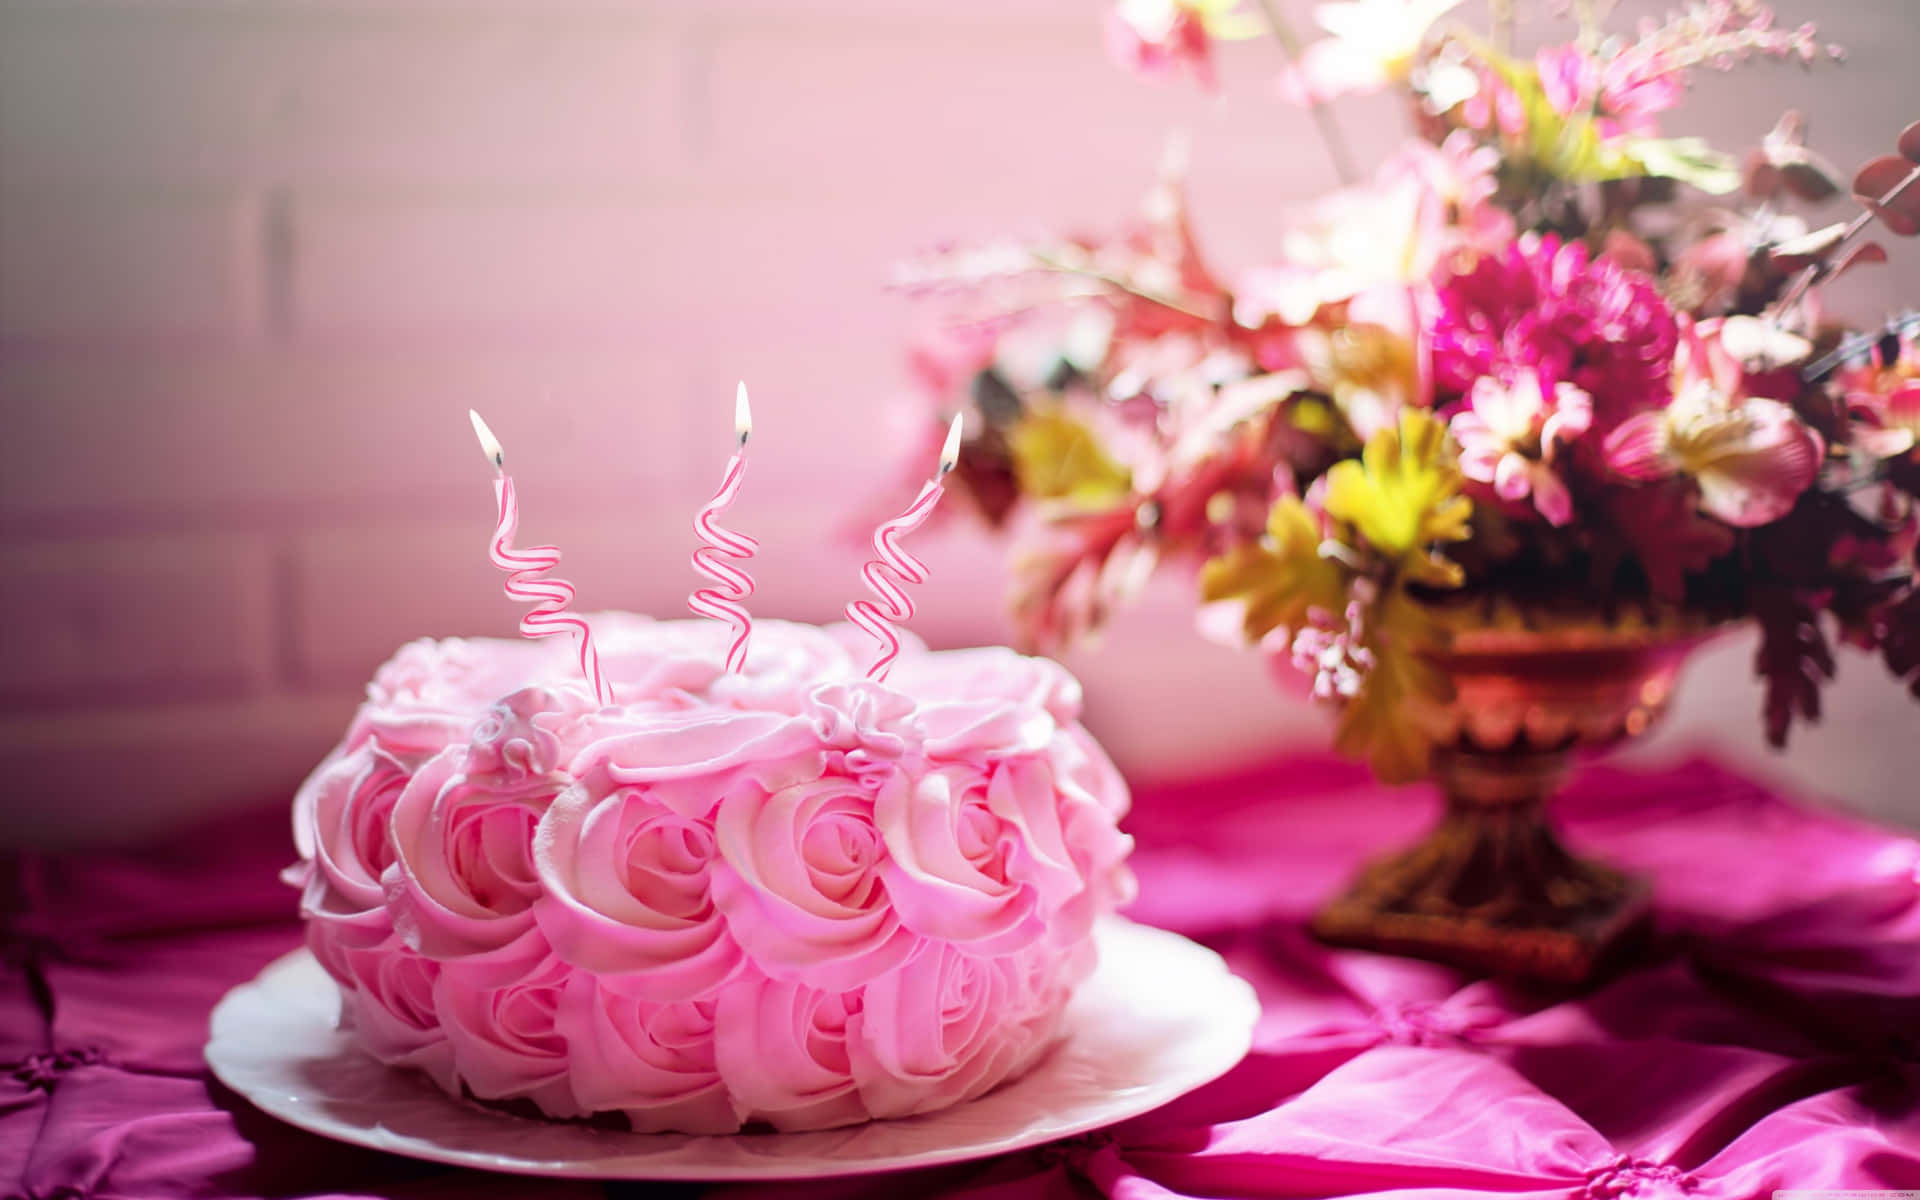 A Pink Cake With Candles On Top